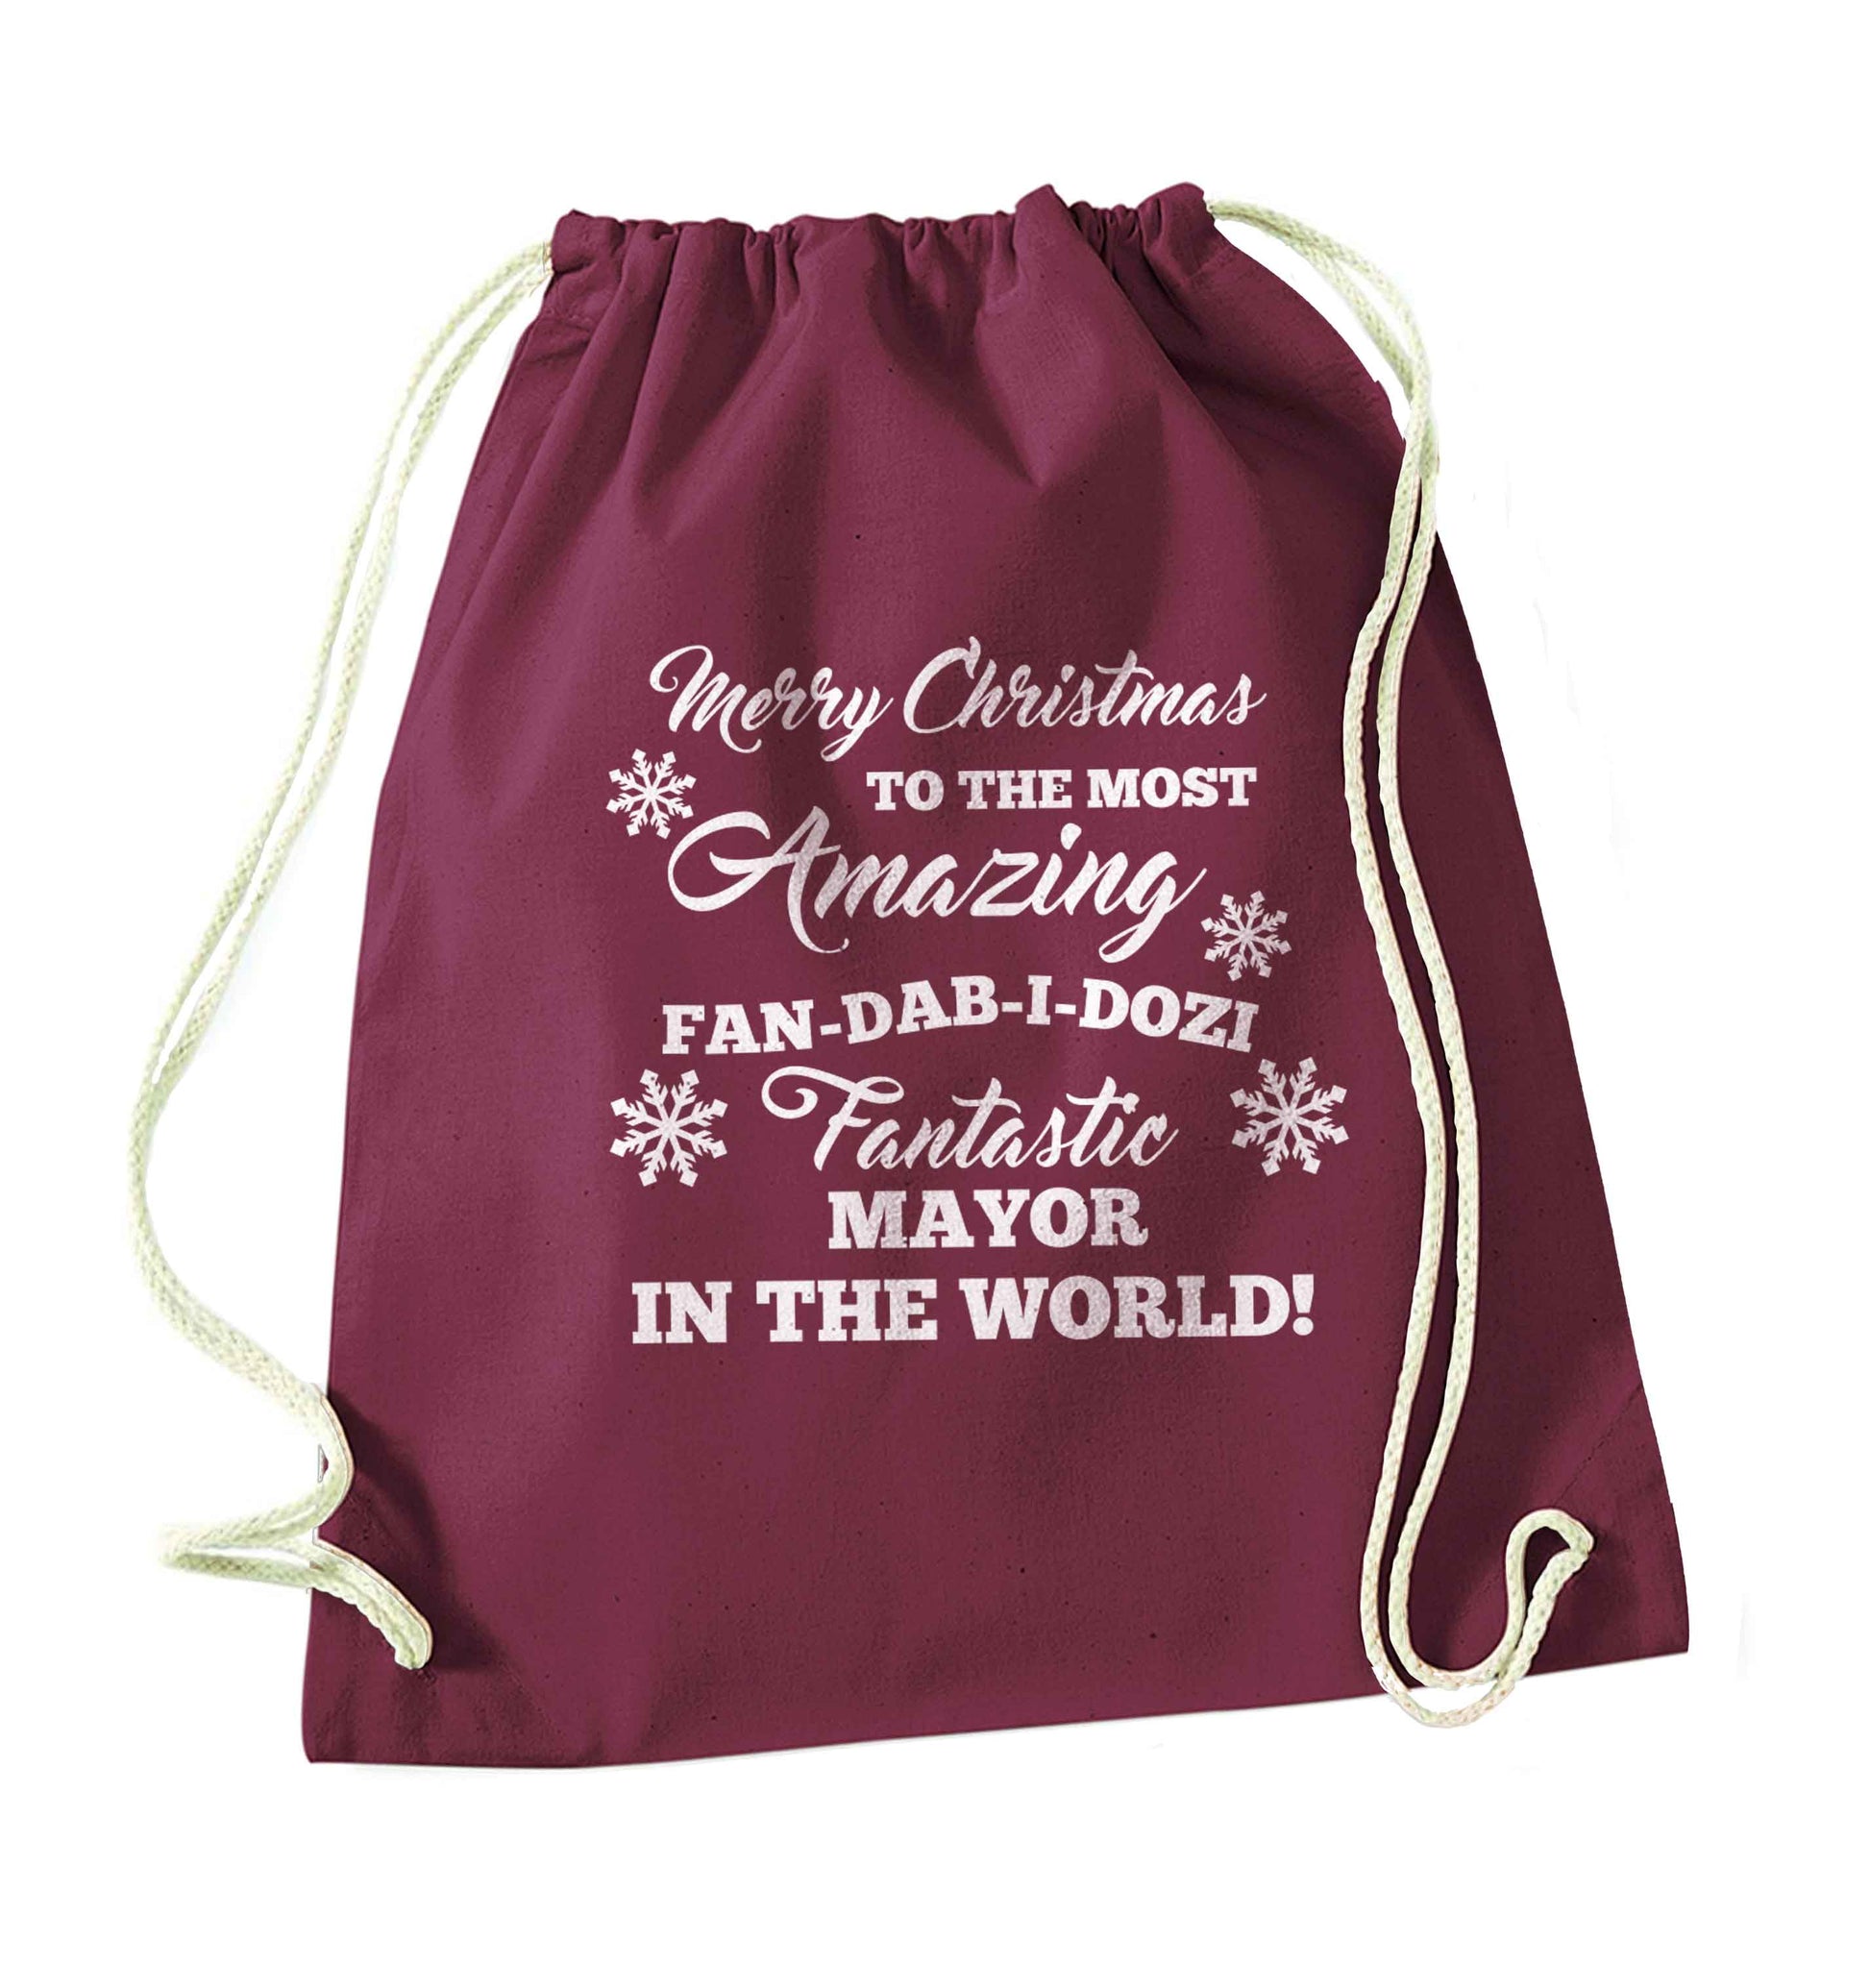 Merry Christmas to the most amazing fireman in the world! maroon drawstring bag